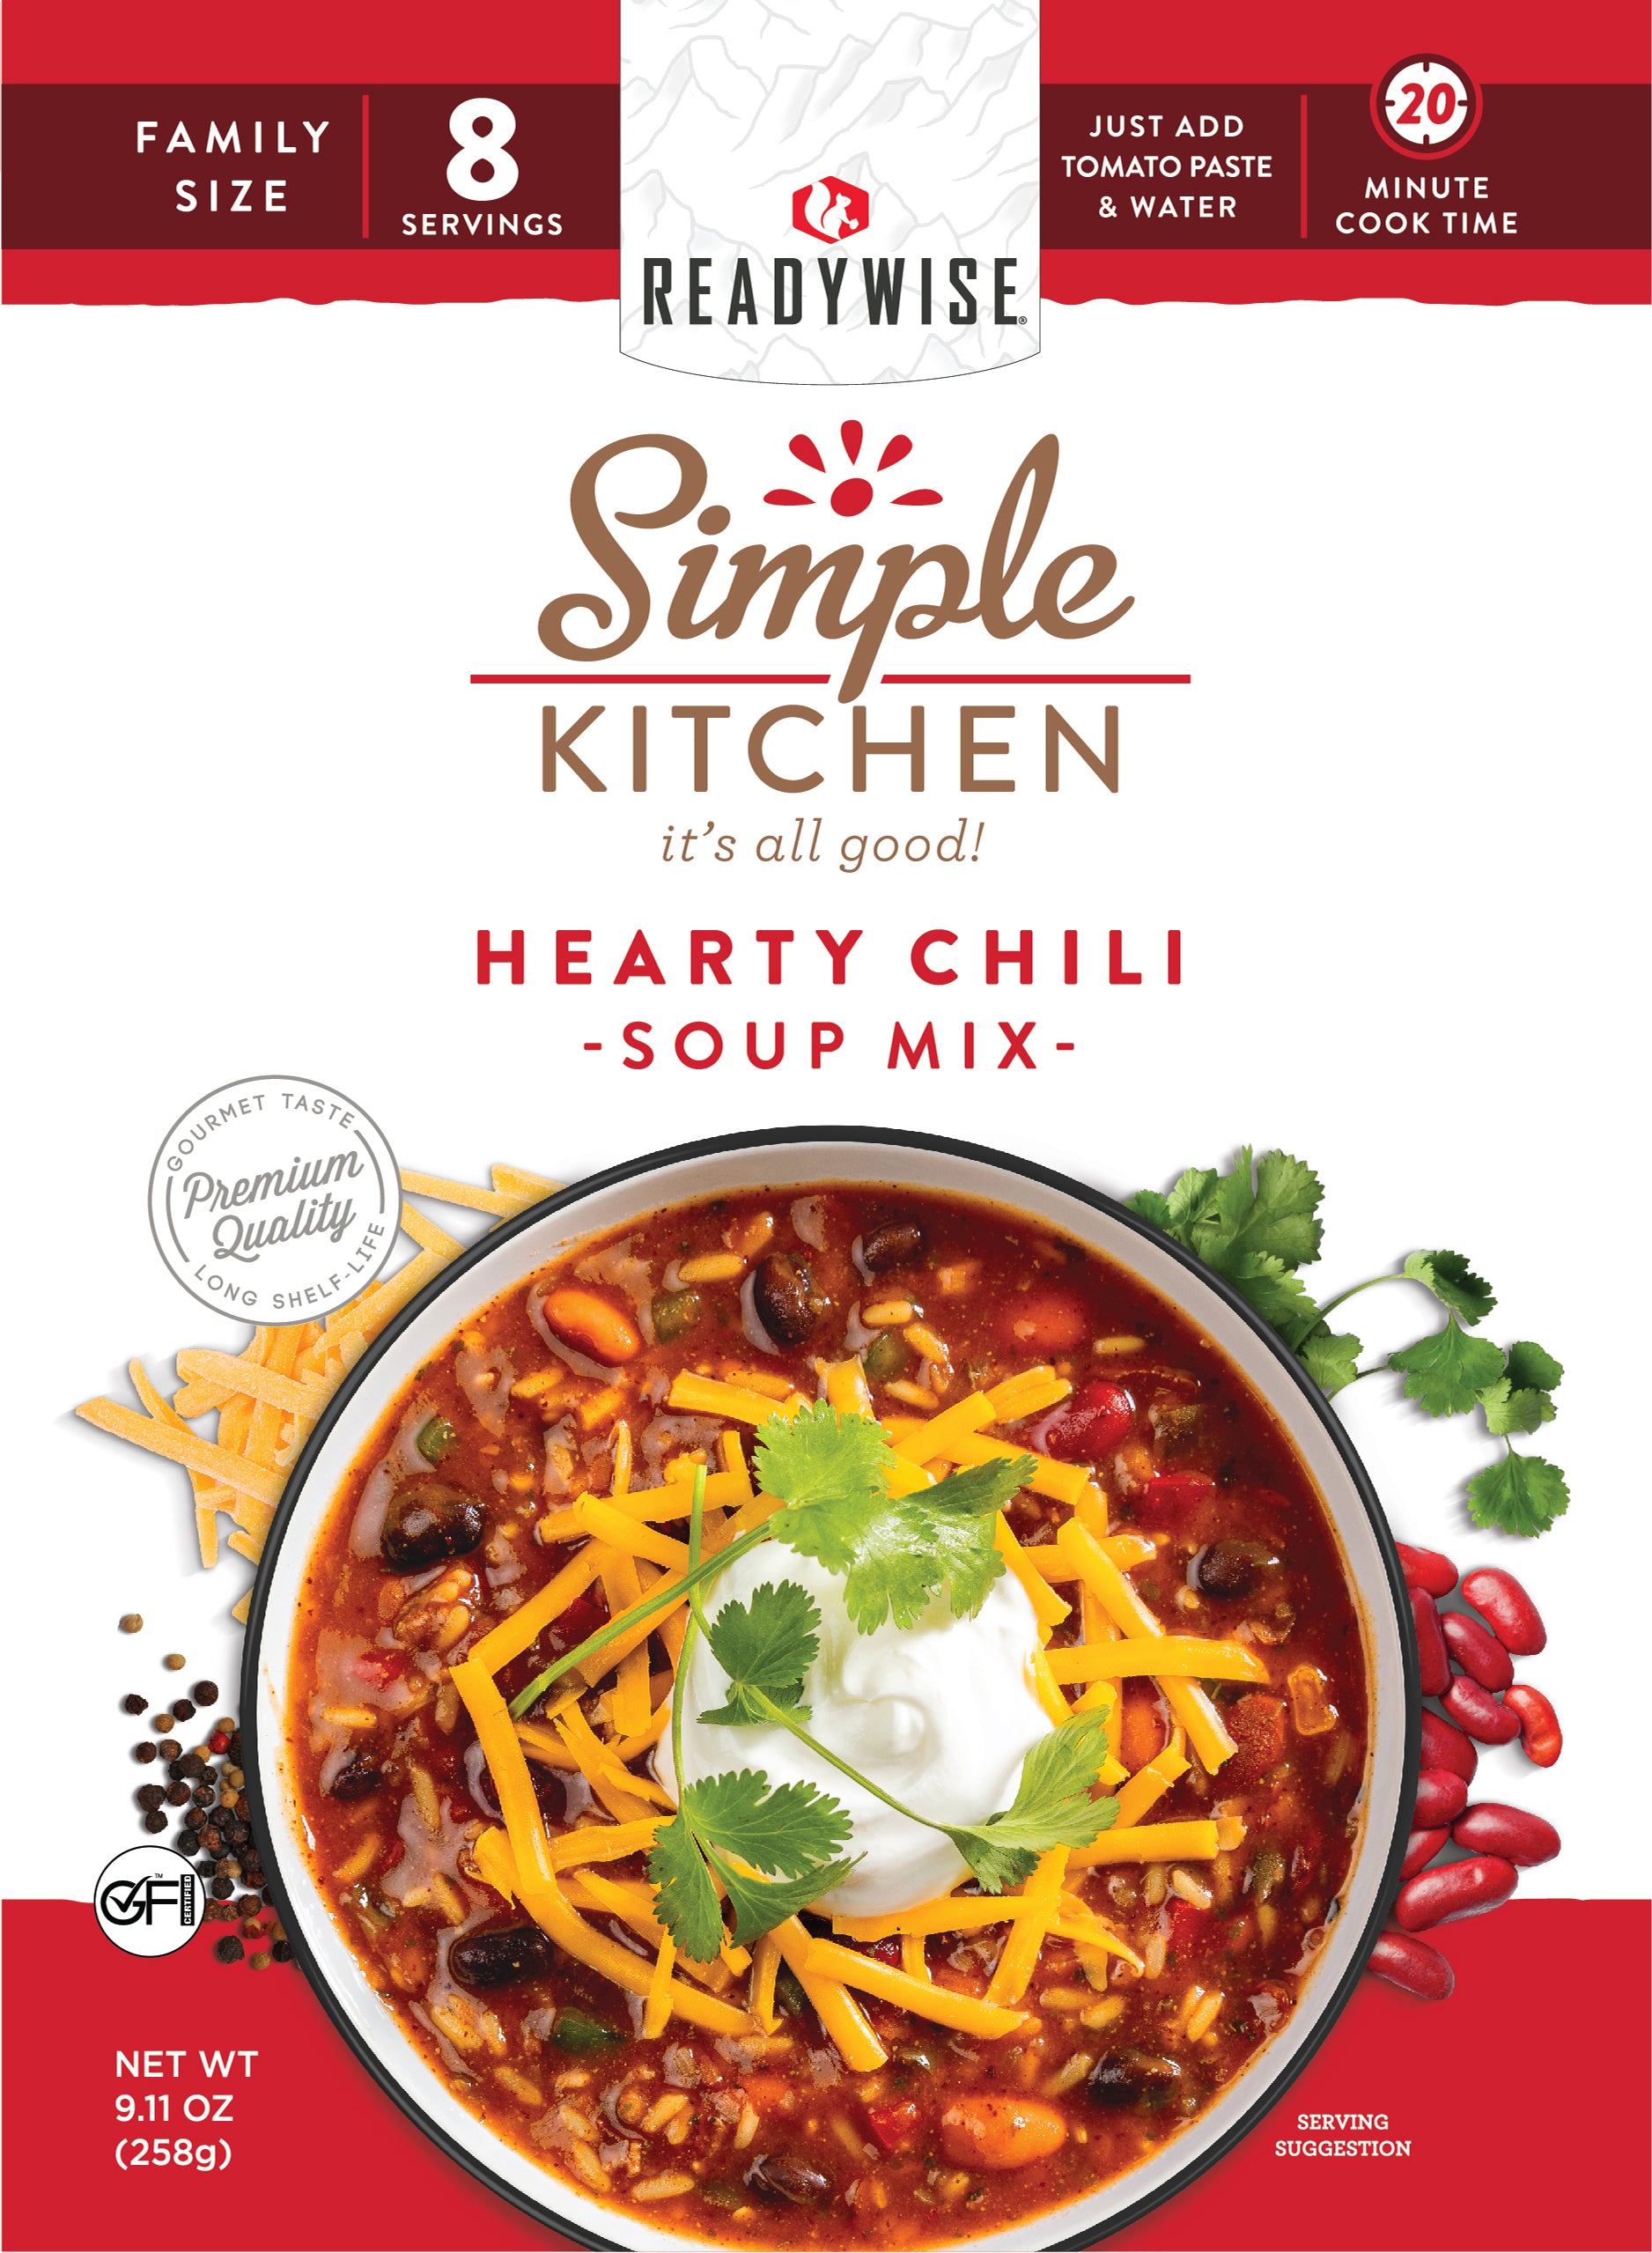 HEARTY CHILI - Soup Mix - 6 Ct Case - 8 Servings